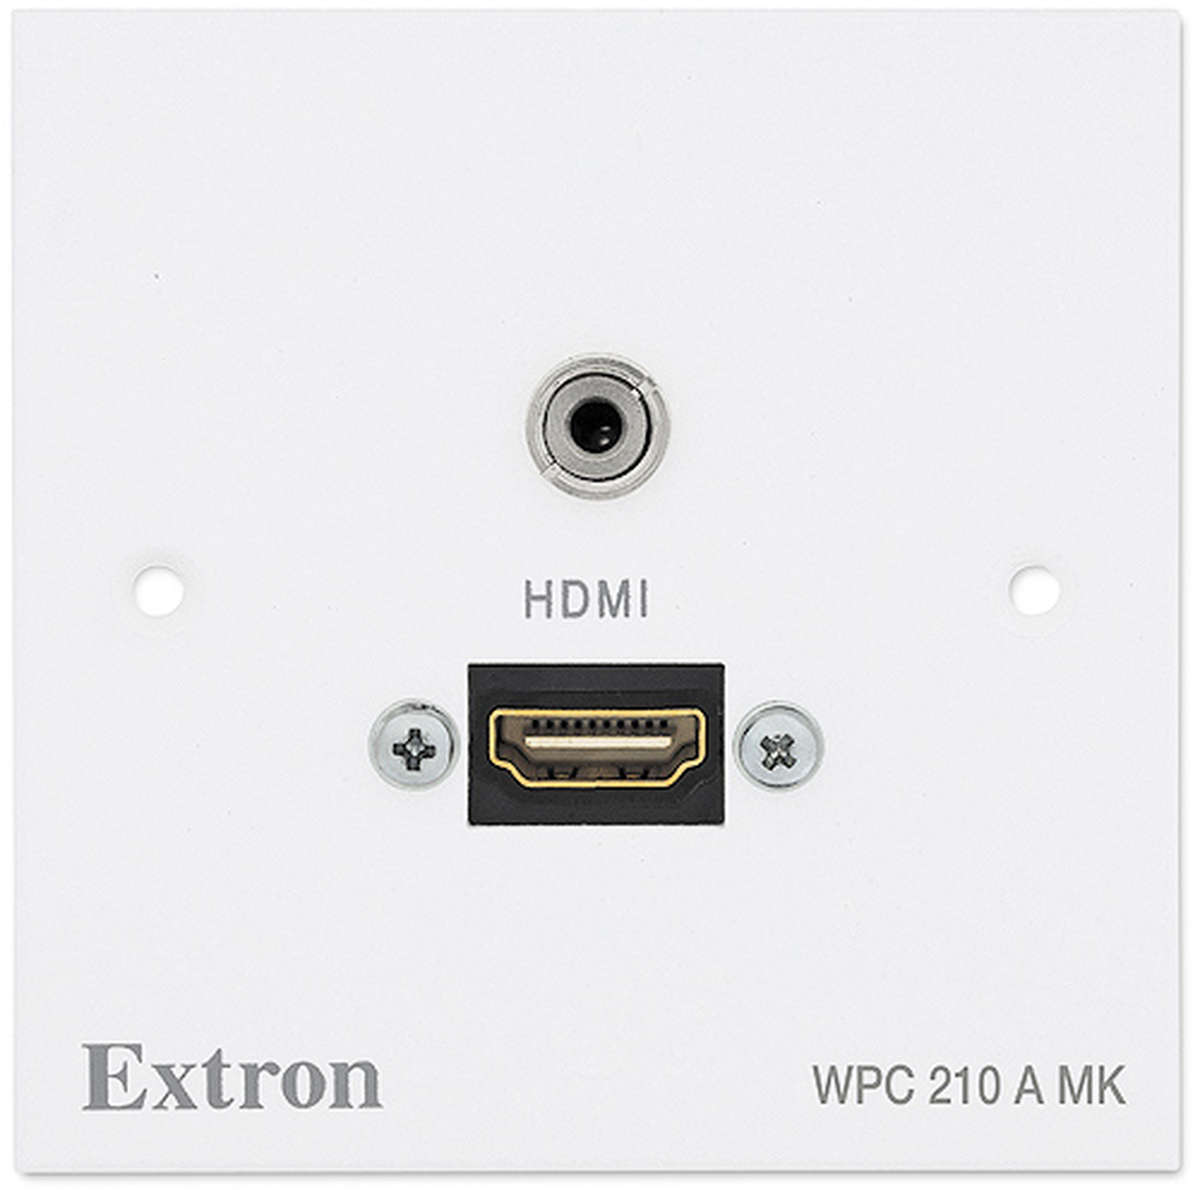 Extron WPC 210 A MK 70-990-03  product image